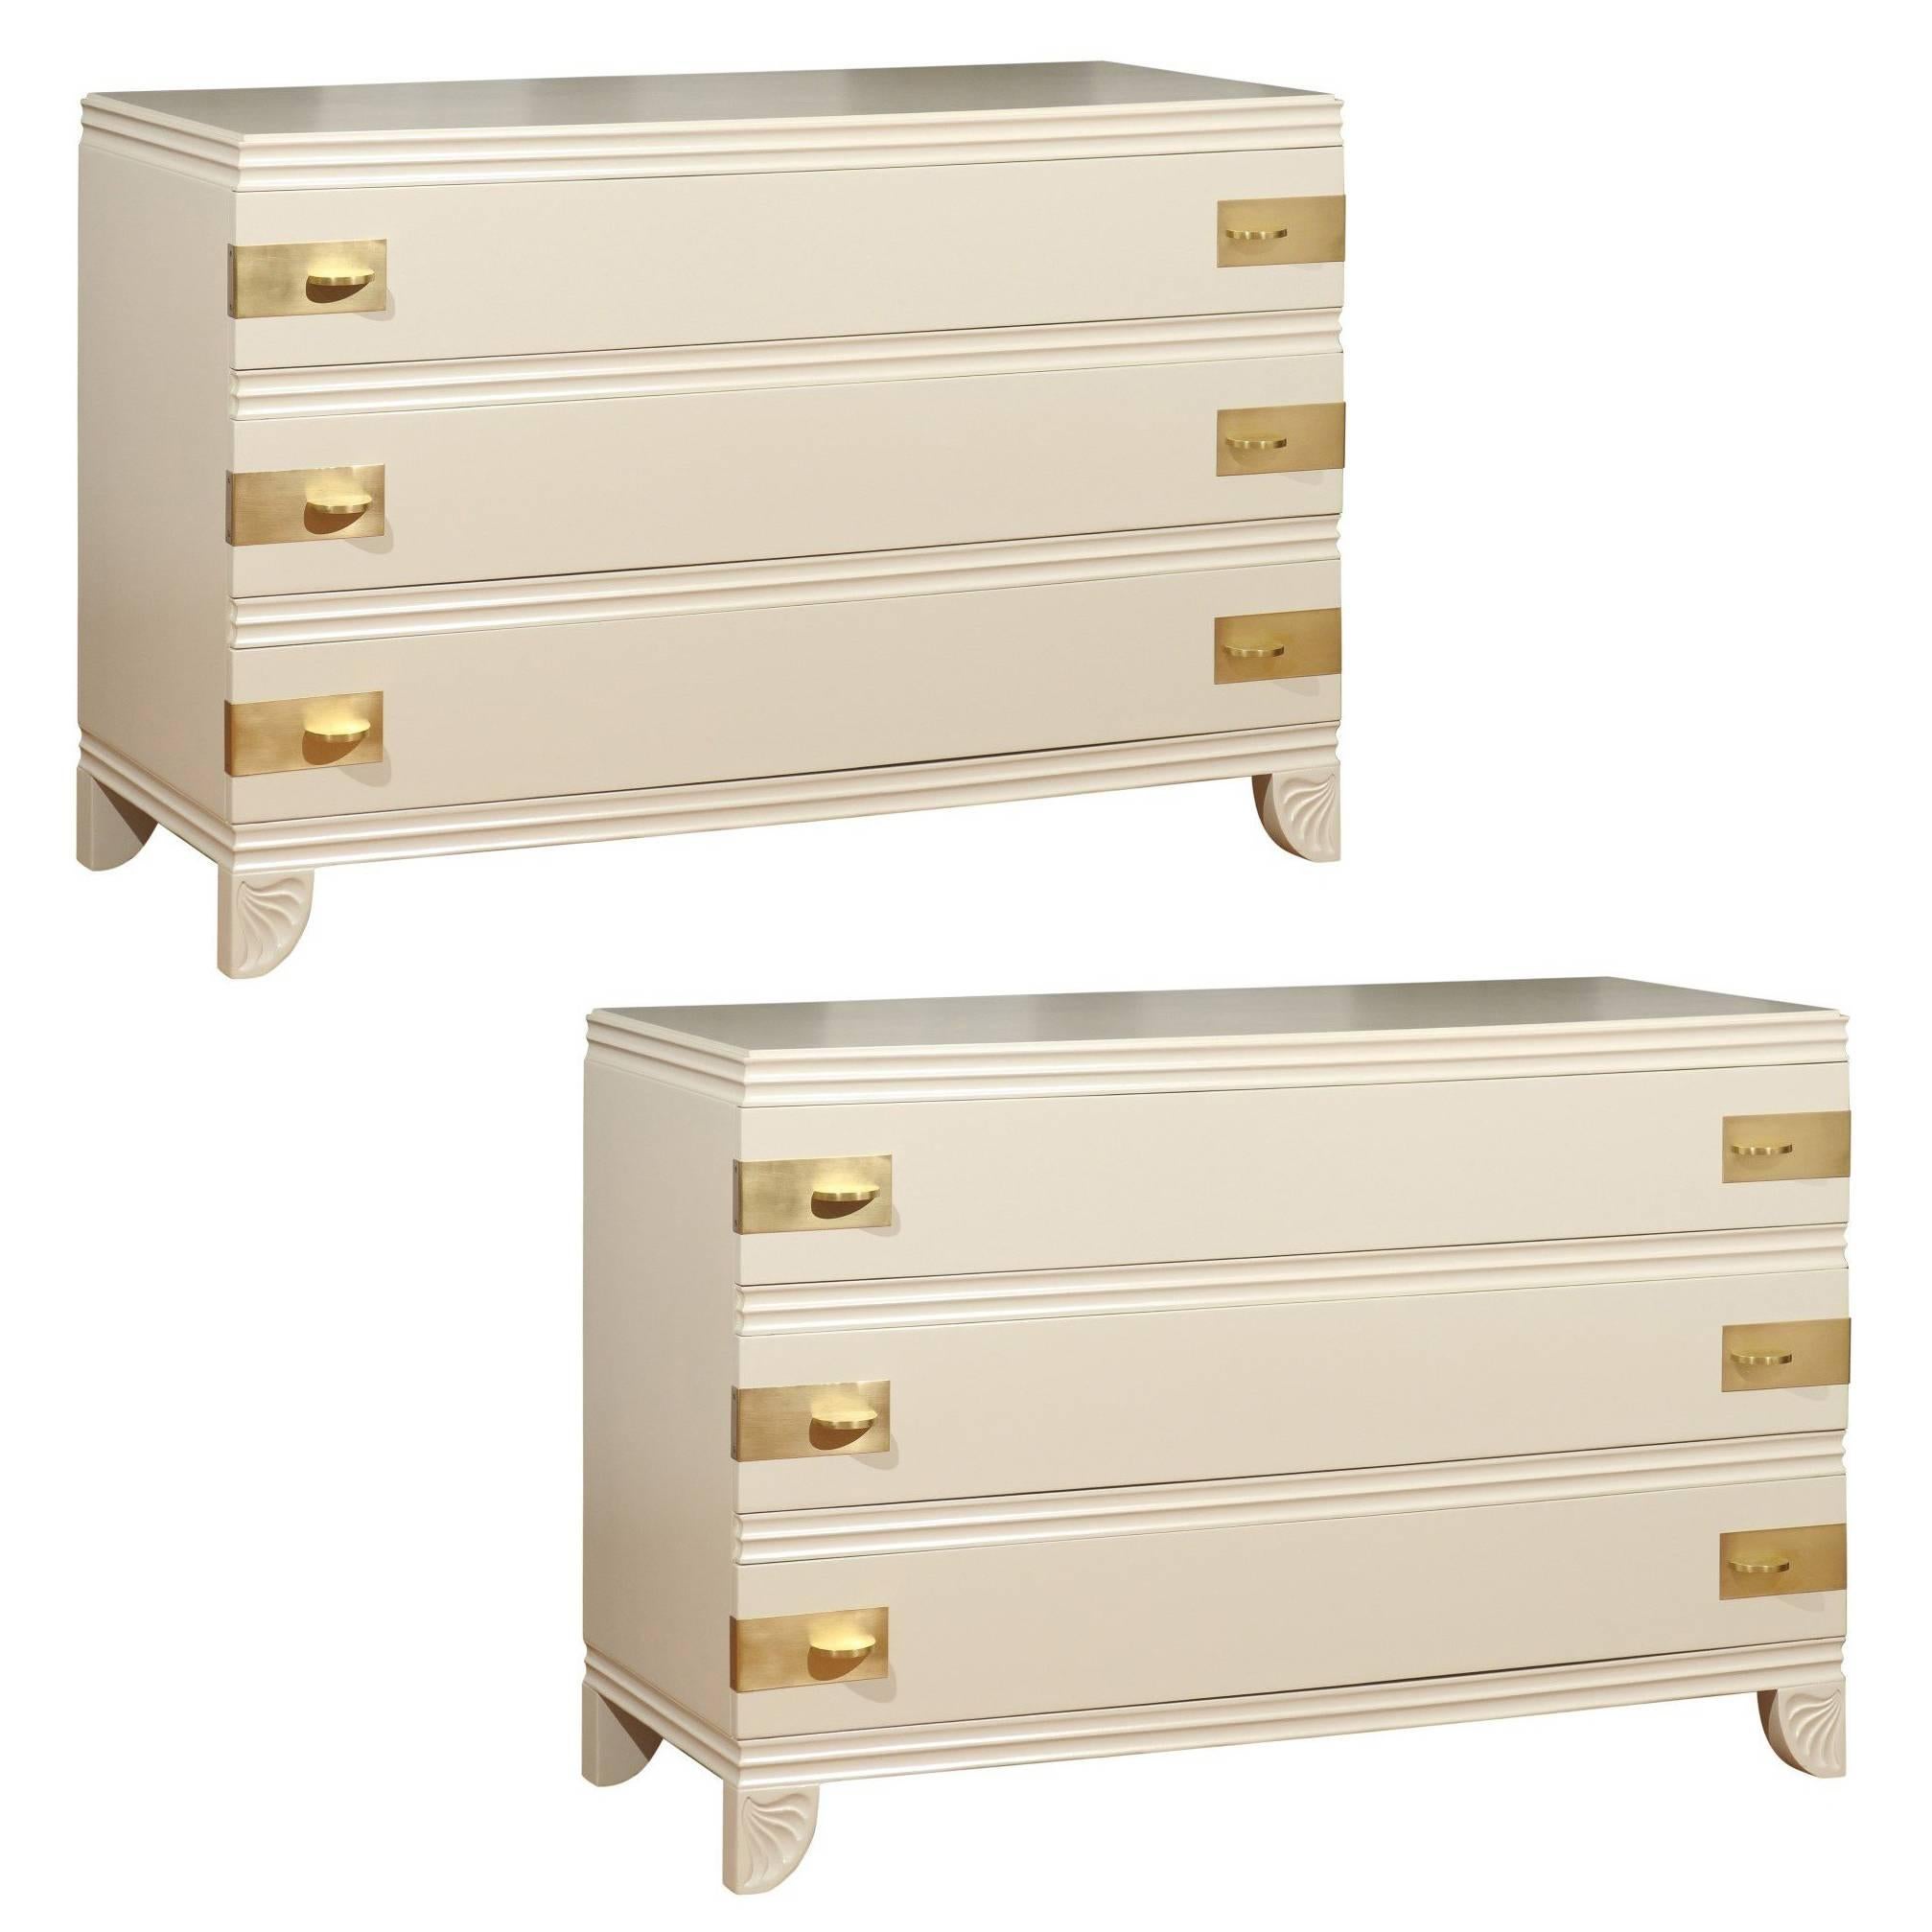 Gorgeous Restored Three-Drawer Chest by Widdicomb in Cream Lacquer